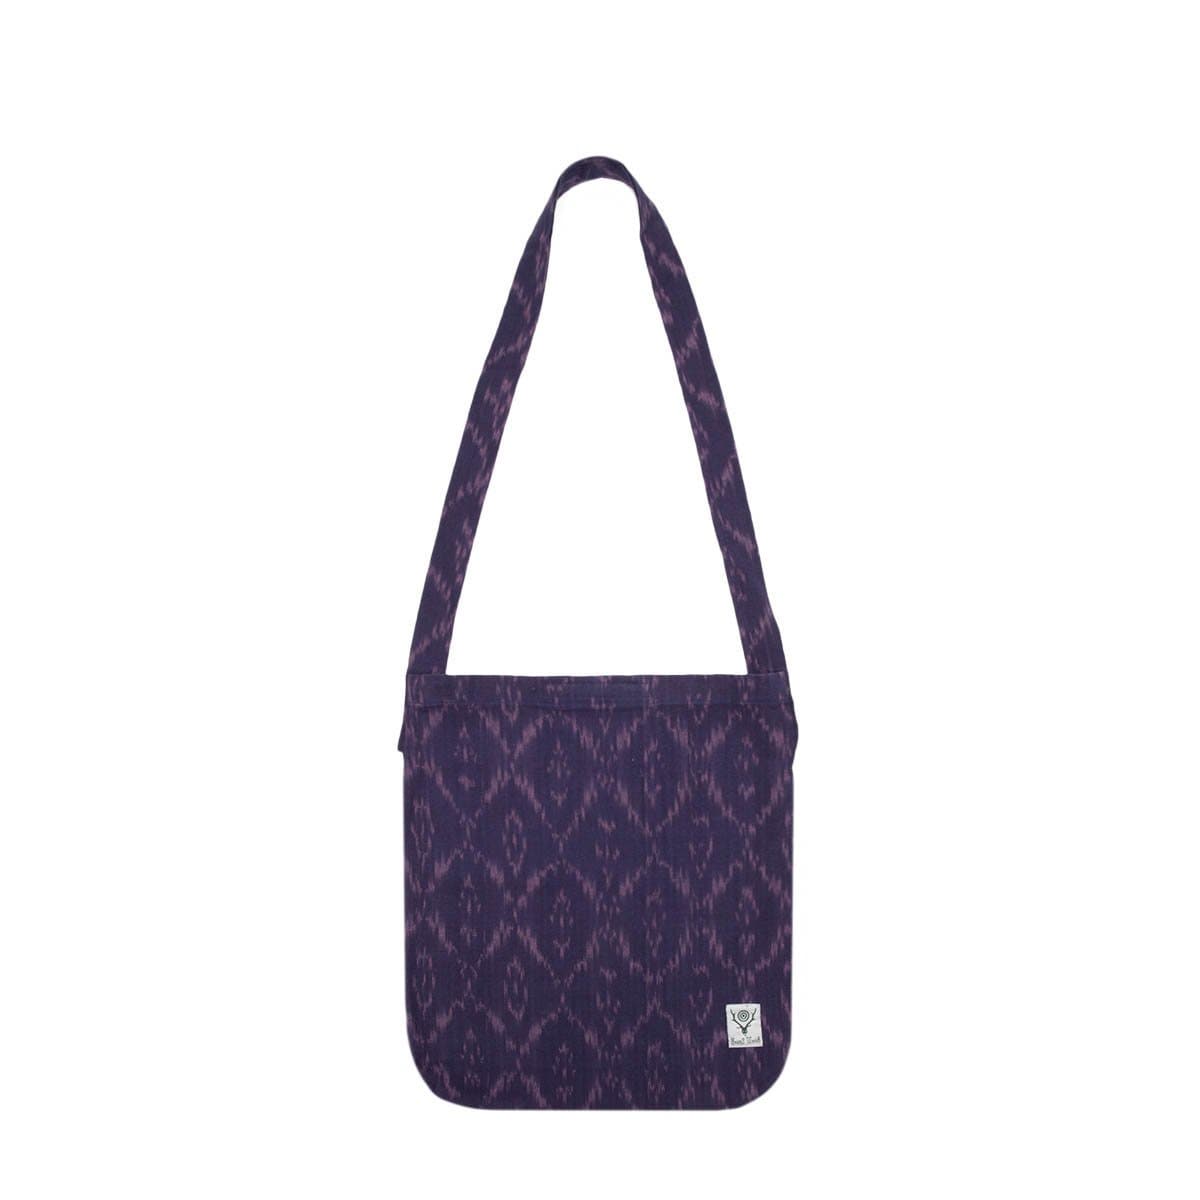 South2 West8 Bags & Accessories PURPLE / OS BOOK BAG